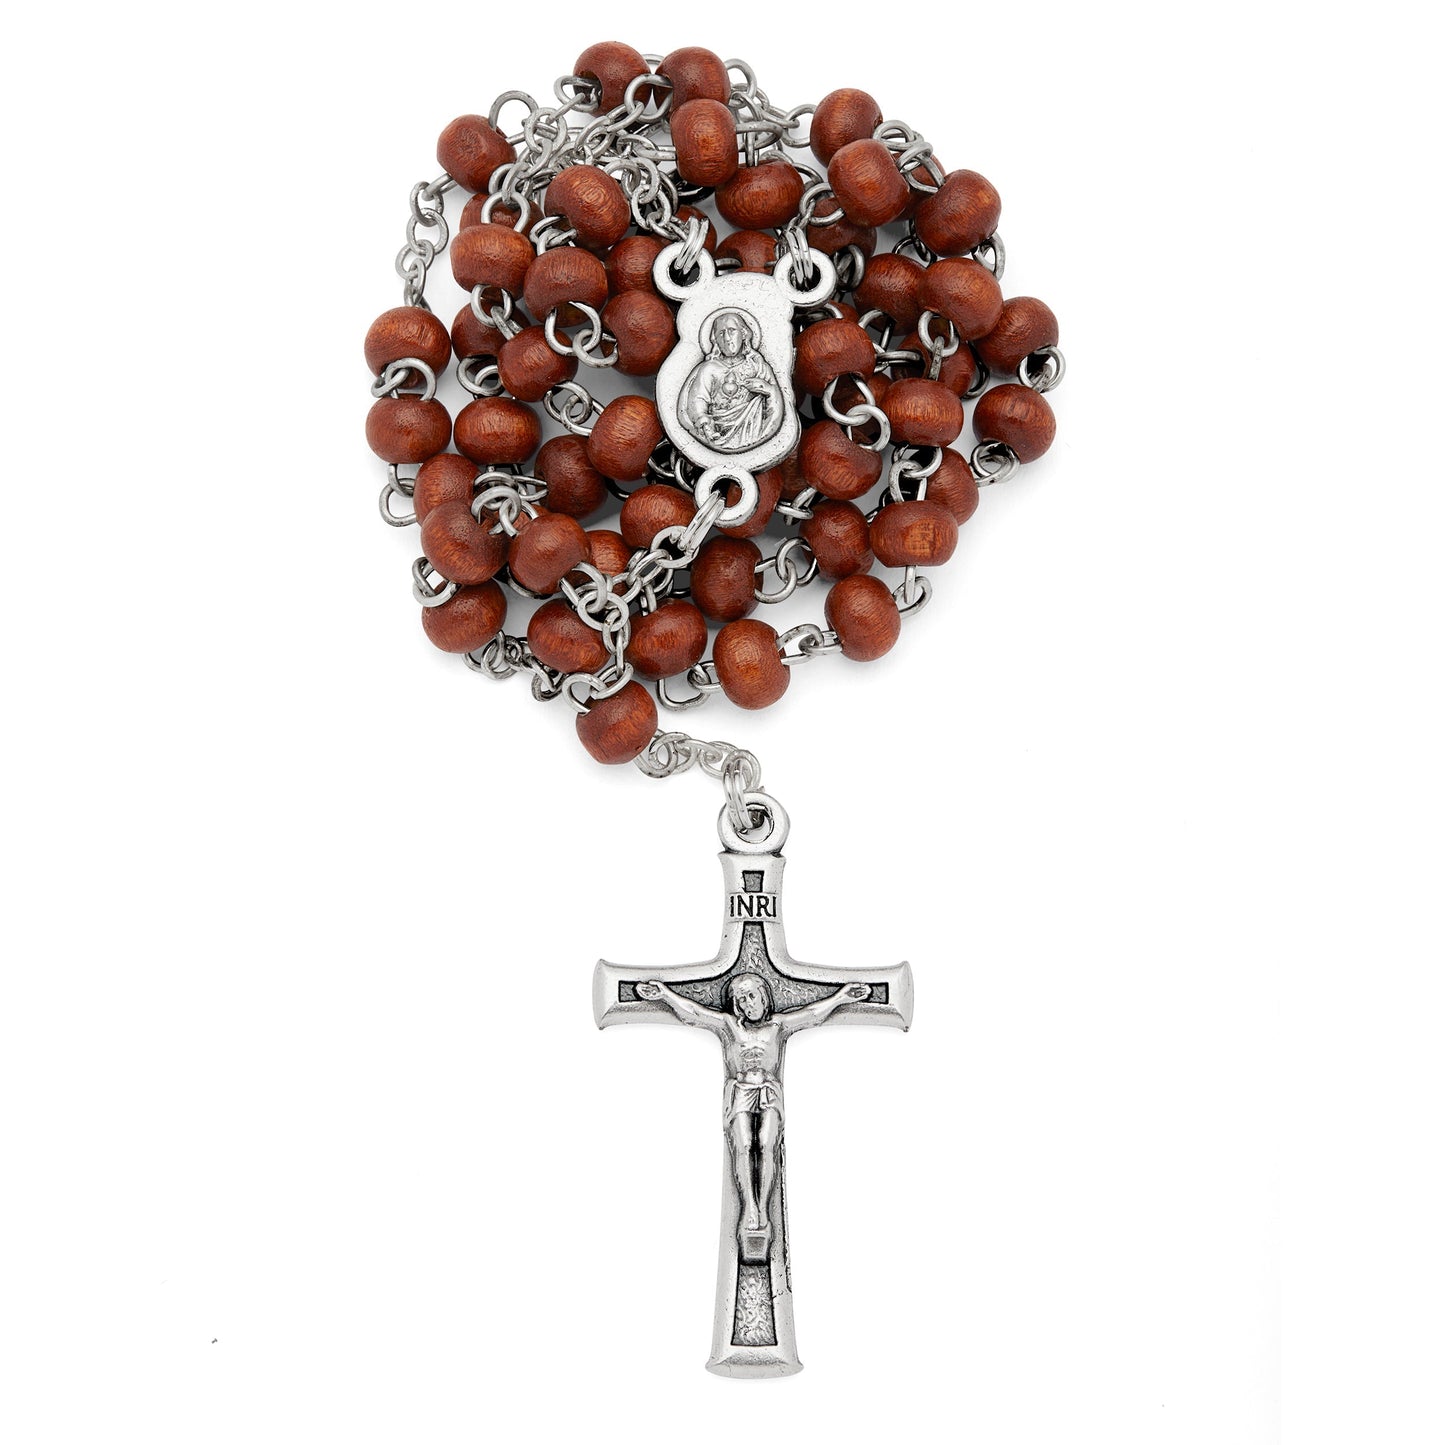 Mondo Cattolico Rosary Box 5x6 cm (1.97x2.36 in) / 3x5 mm (0.12x0.2 in) / 41 cm (16.14 in) Ulive Wood Putto Angel Rosary Case With Wood Rosary